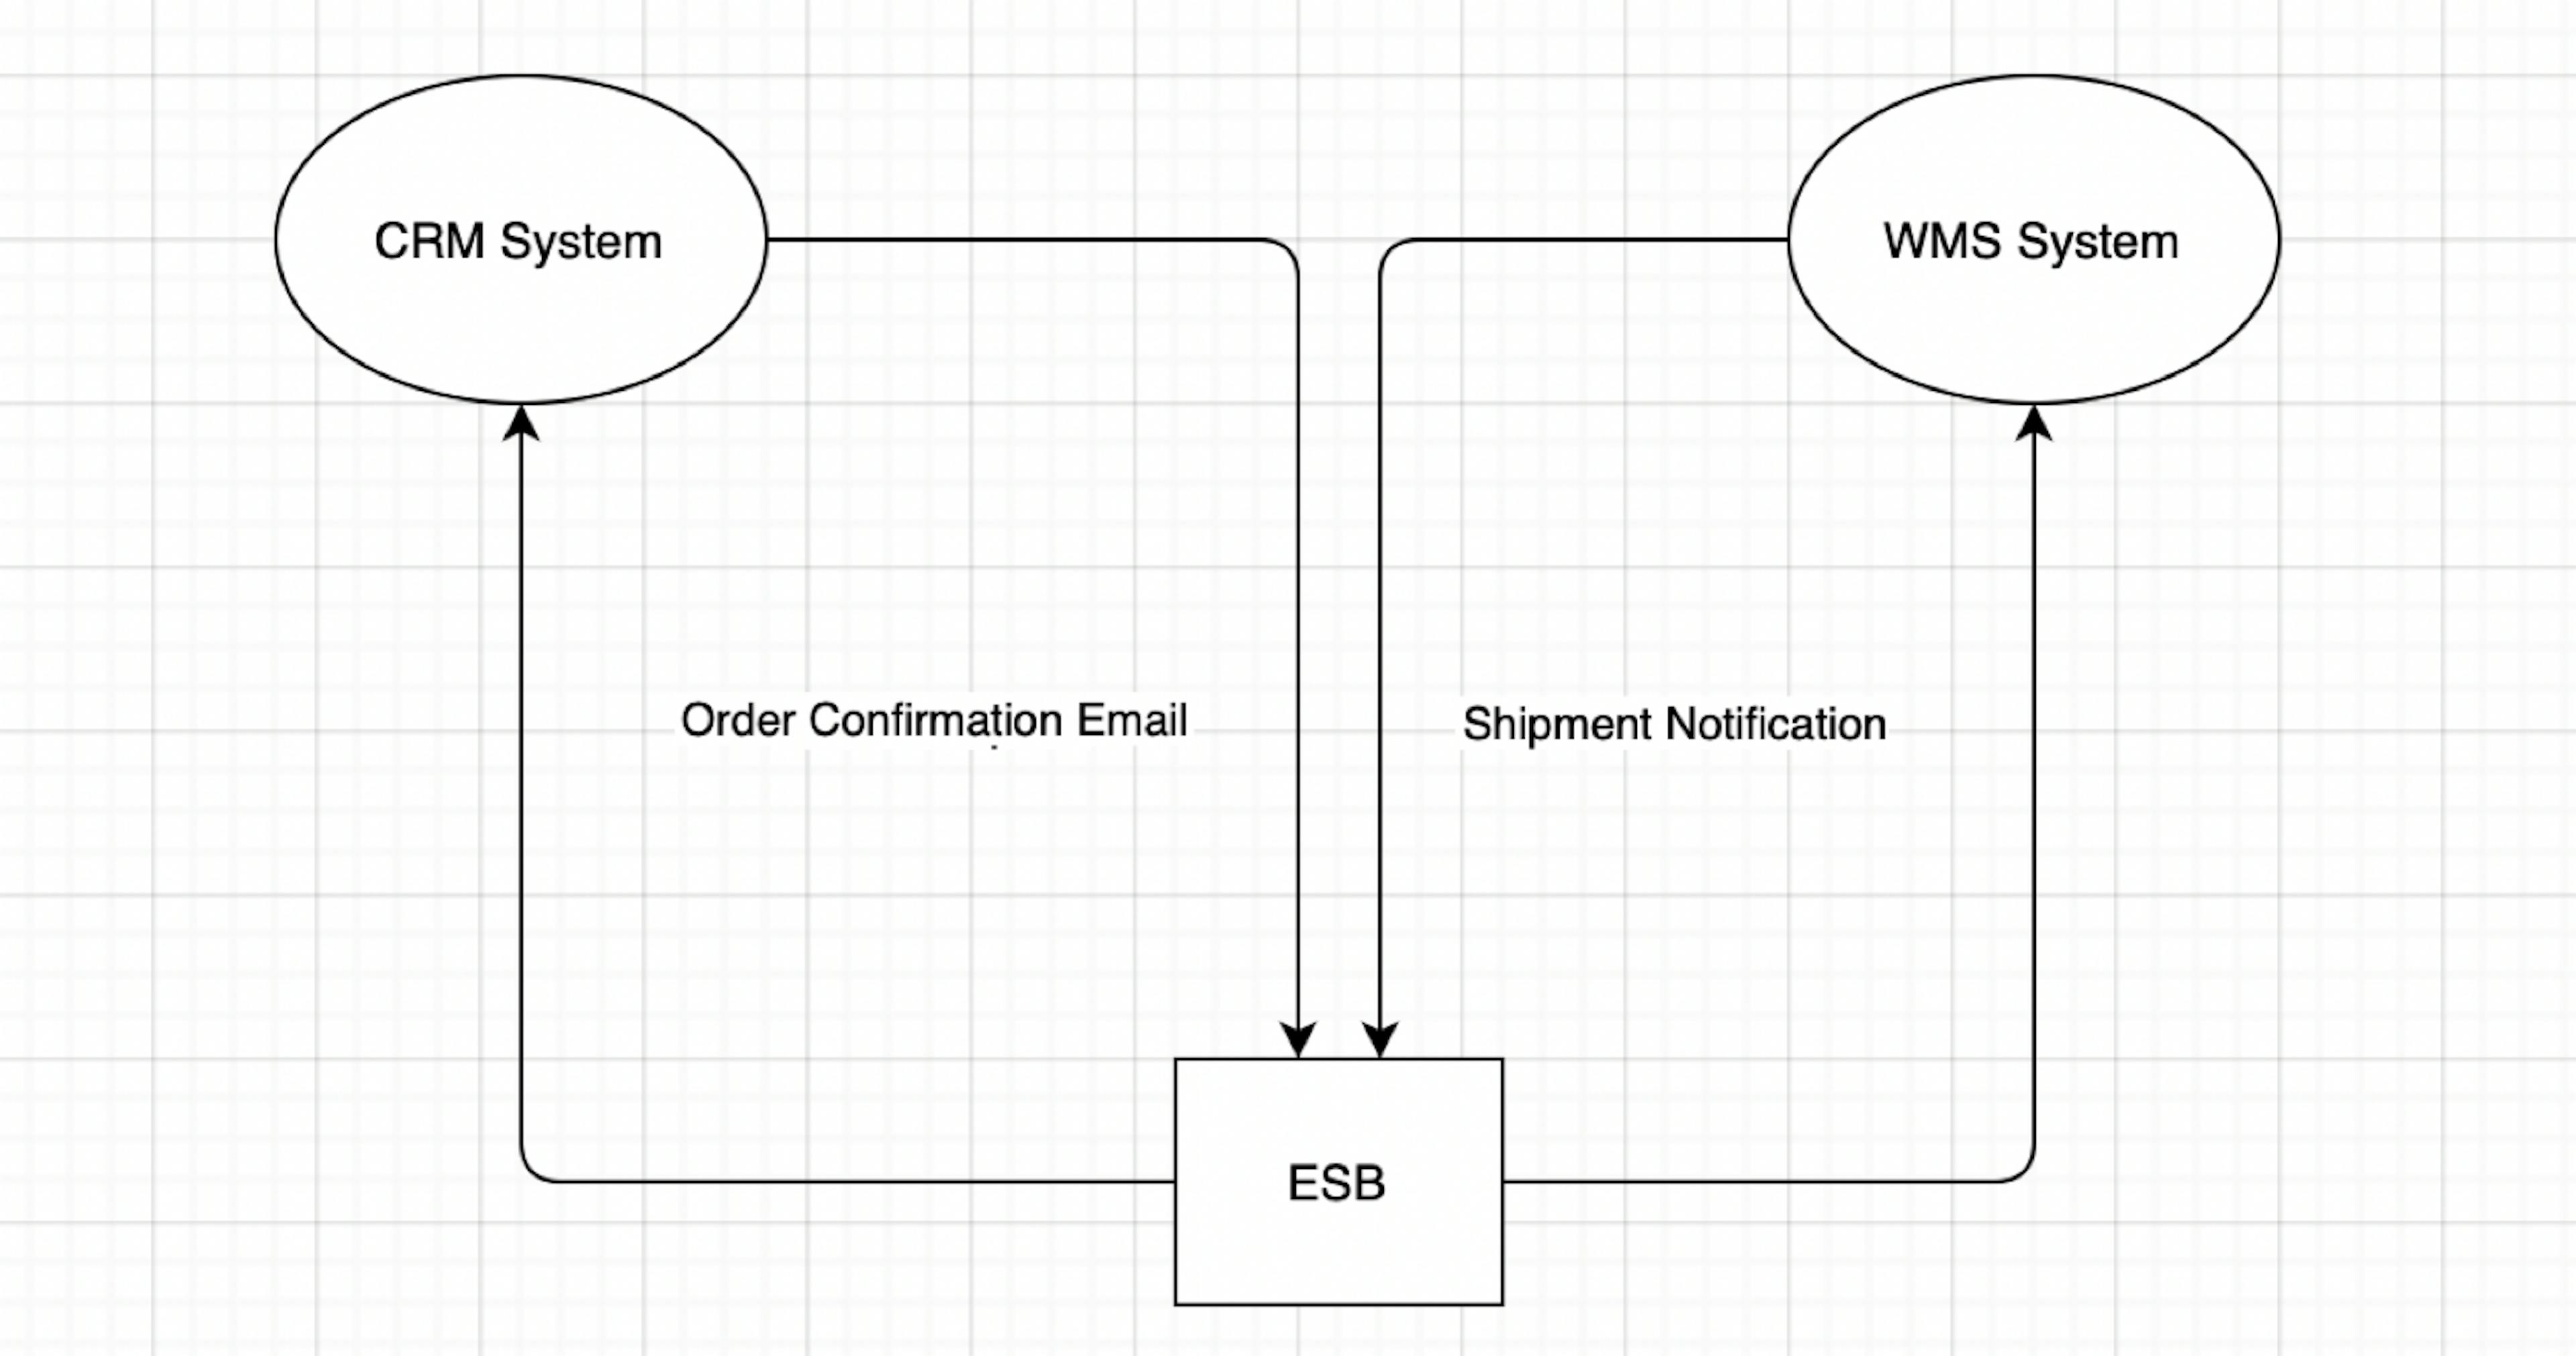 Integration of CRM and WMS Systems using ESB